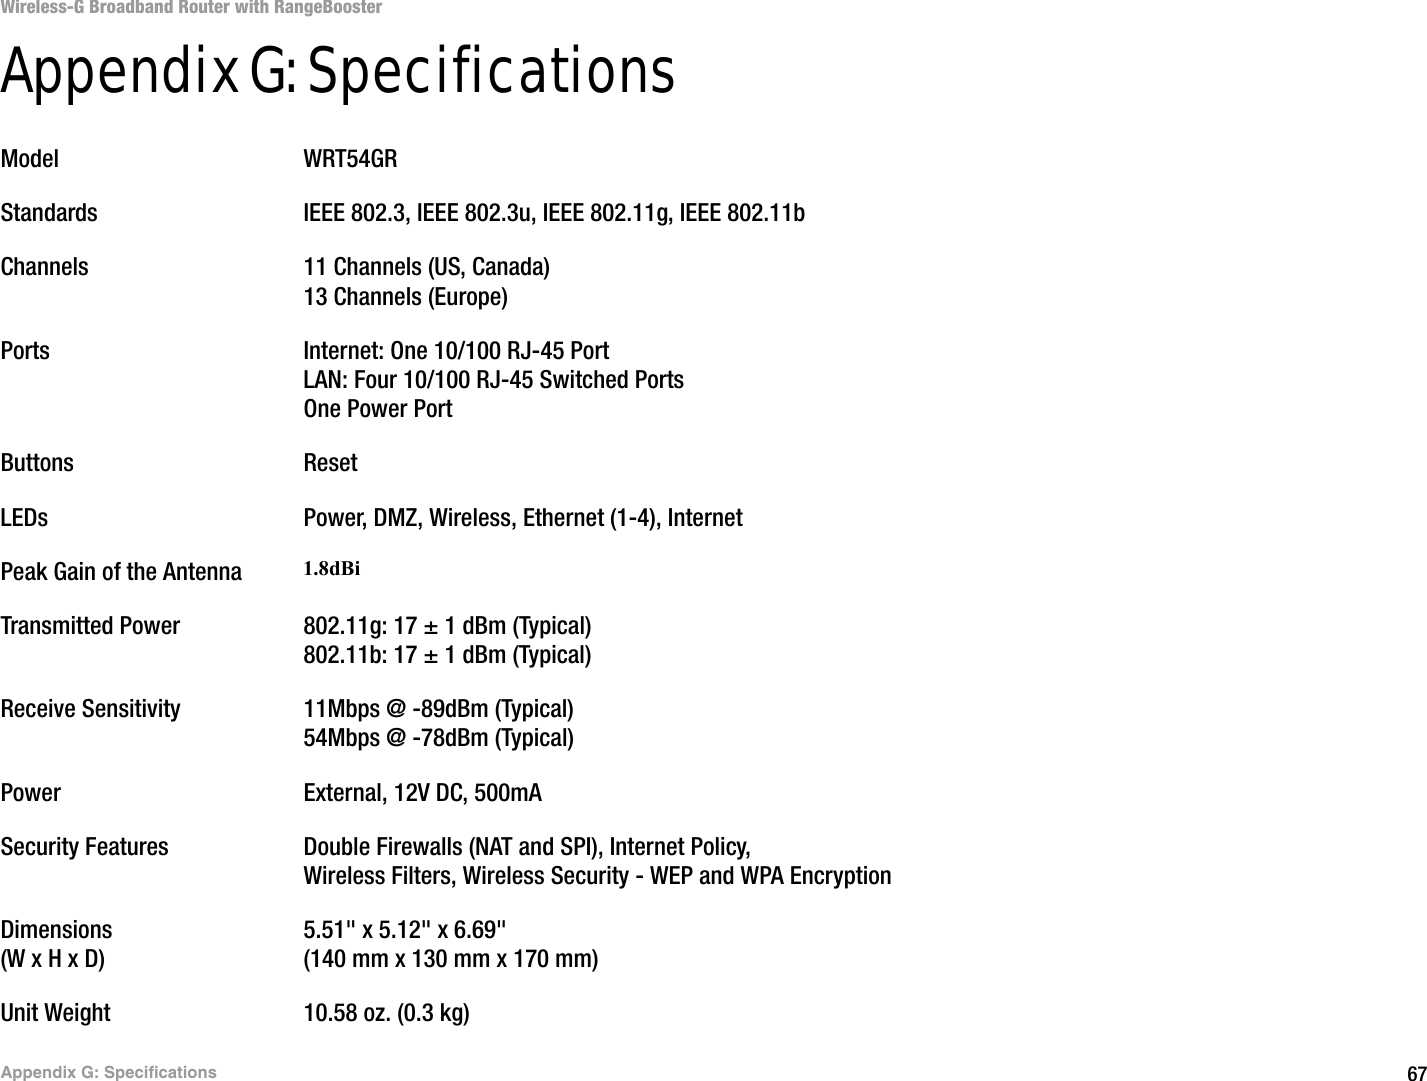 67Appendix G: SpecificationsWireless-G Broadband Router with RangeBoosterAppendix G: SpecificationsModel WRT54GRStandards IEEE 802.3, IEEE 802.3u, IEEE 802.11g, IEEE 802.11bChannels 11 Channels (US, Canada)13 Channels (Europe)Ports Internet: One 10/100 RJ-45 PortLAN: Four 10/100 RJ-45 Switched PortsOne Power PortButtons ResetLEDs Power, DMZ, Wireless, Ethernet (1-4), InternetPeak Gain of the Antenna 2 dBiTransmitted Power 802.11g: 17 ± 1 dBm (Typical)802.11b: 17 ± 1 dBm (Typical)Receive Sensitivity 11Mbps @ -89dBm (Typical)54Mbps @ -78dBm (Typical)Power External, 12V DC, 500mASecurity Features Double Firewalls (NAT and SPI), Internet Policy, Wireless Filters, Wireless Security - WEP and WPA Encryption Dimensions 5.51&quot; x 5.12&quot; x 6.69&quot;(W x H x D) (140 mm x 130 mm x 170 mm)Unit Weight 10.58 oz. (0.3 kg)1.8dBi